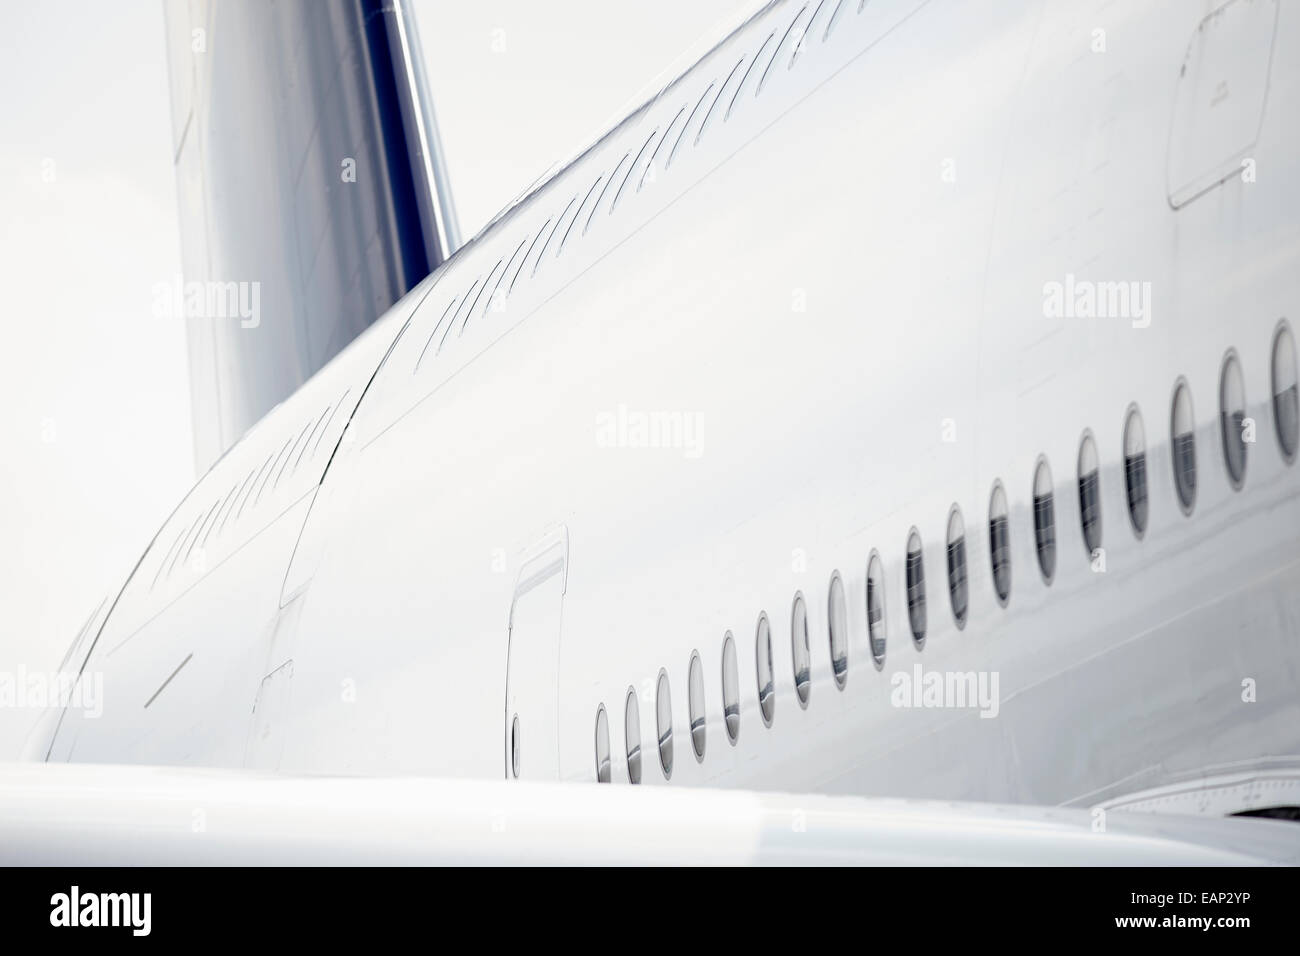 Airbus A 380 side view detail Stock Photo